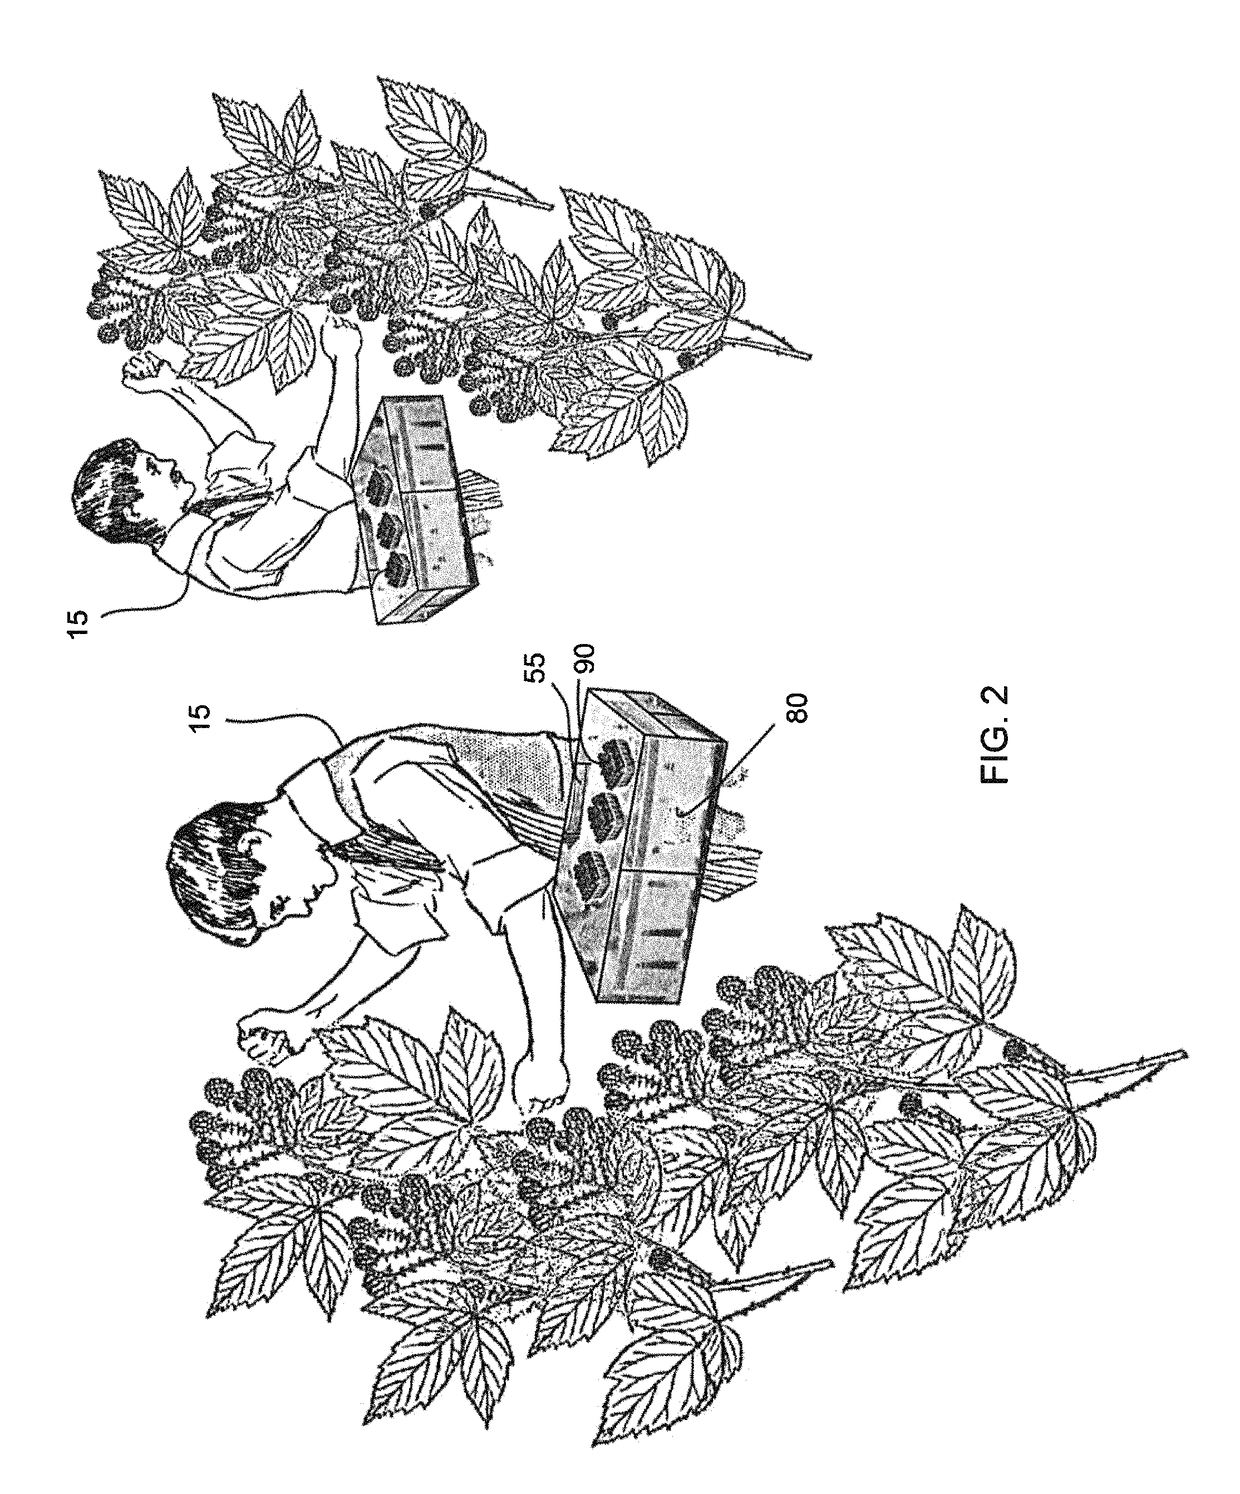 Apparatus, method and system for harvesting, handling and packing berries picked directly from the plant